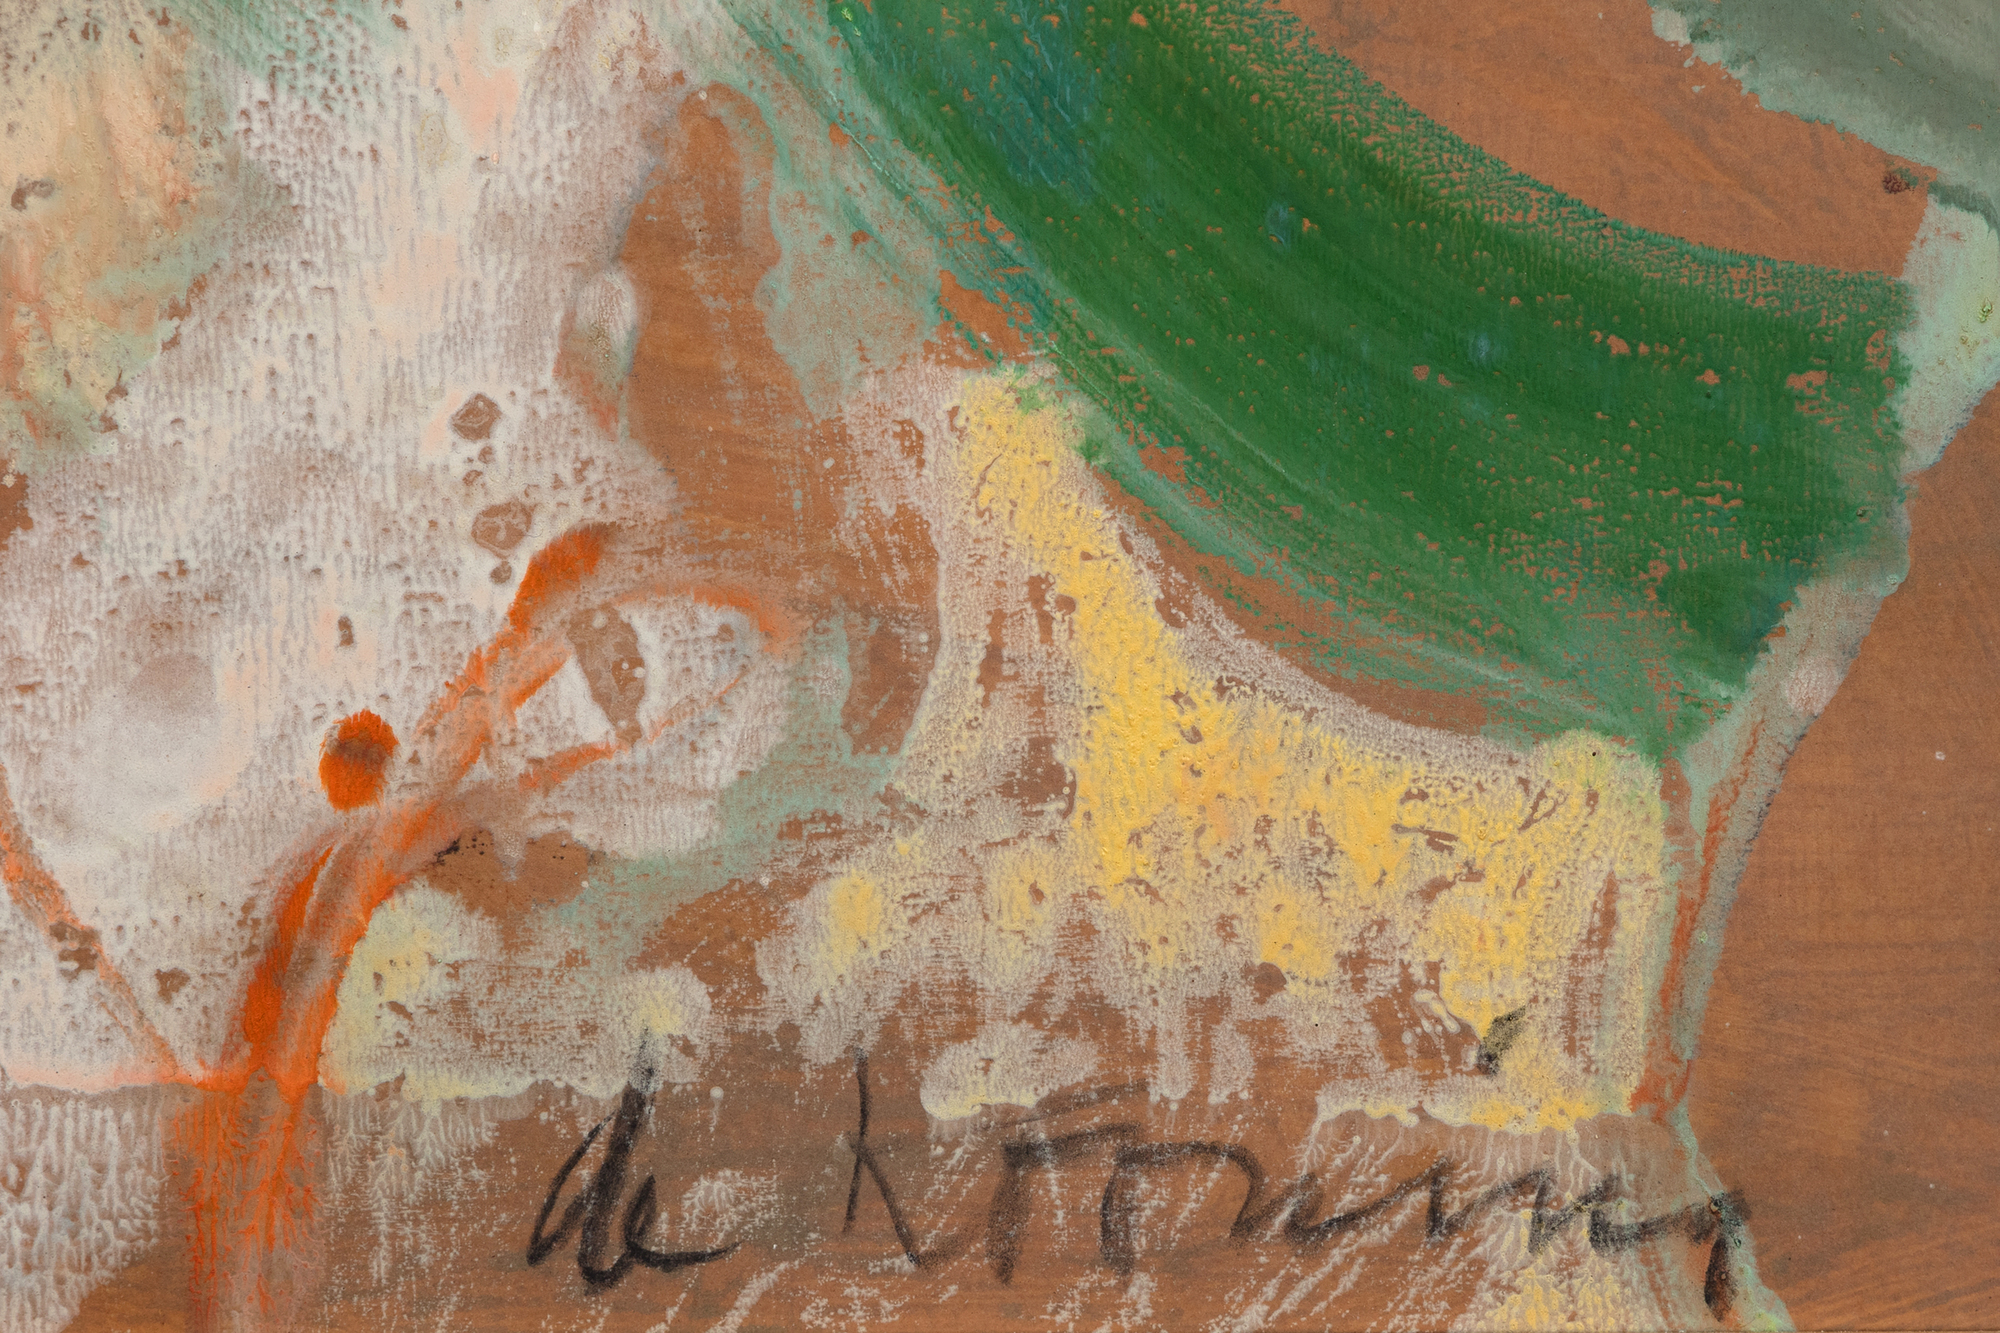 WILLEM DE KOONING - Woman in a Rowboat - oil on paper laid on masonite - 47 1/2 x 36 1/4 in.